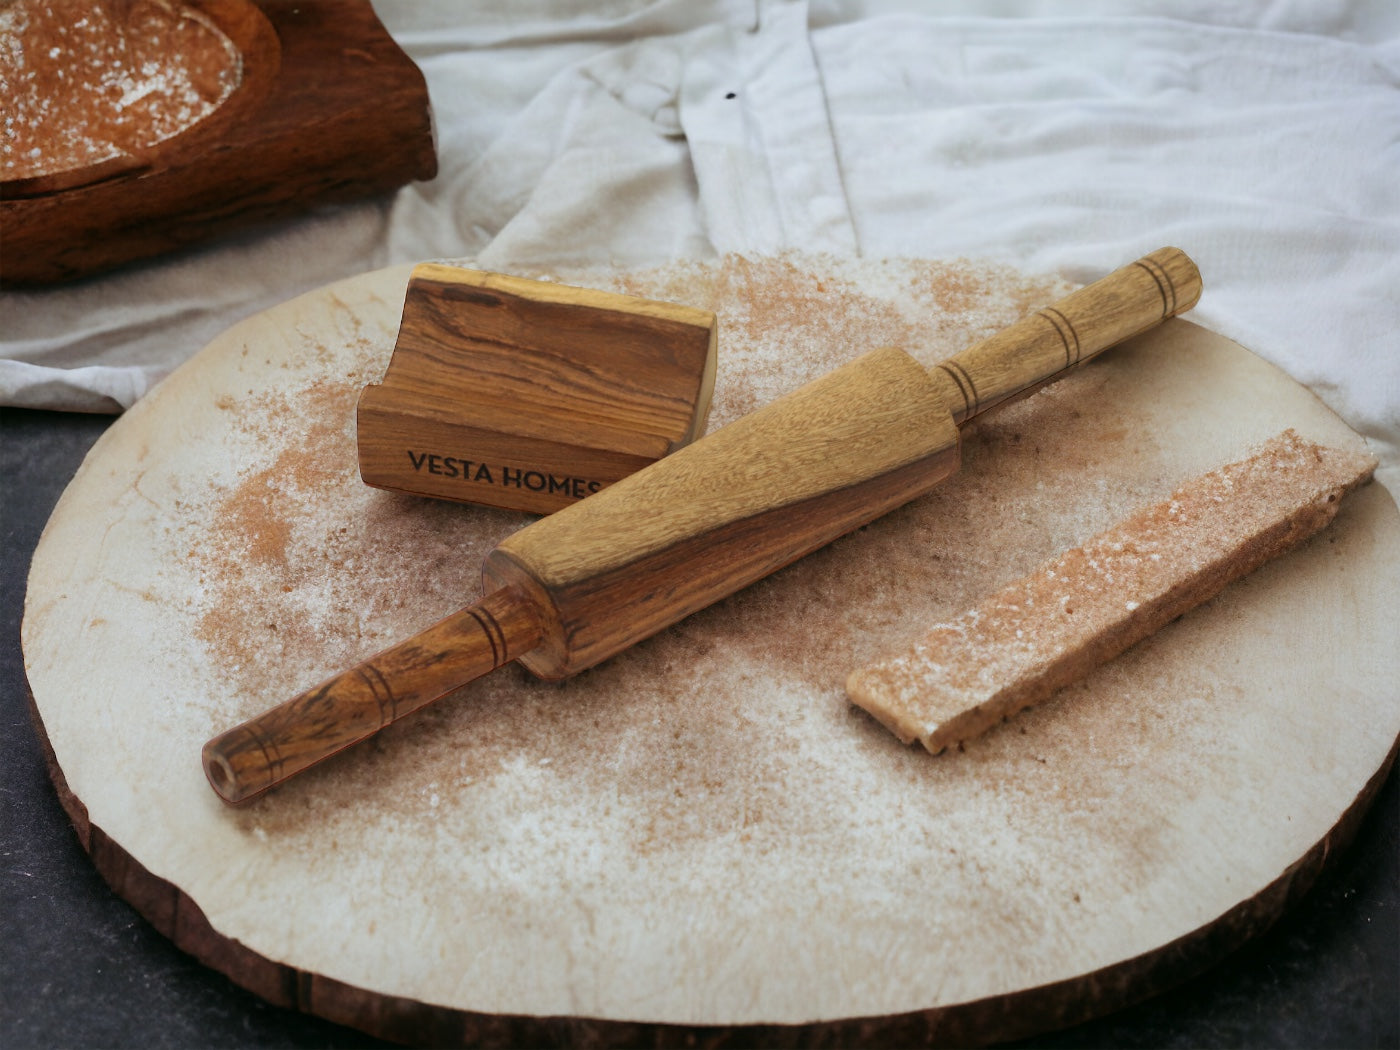 Morbi Chakla & Rolling Pin with Stand